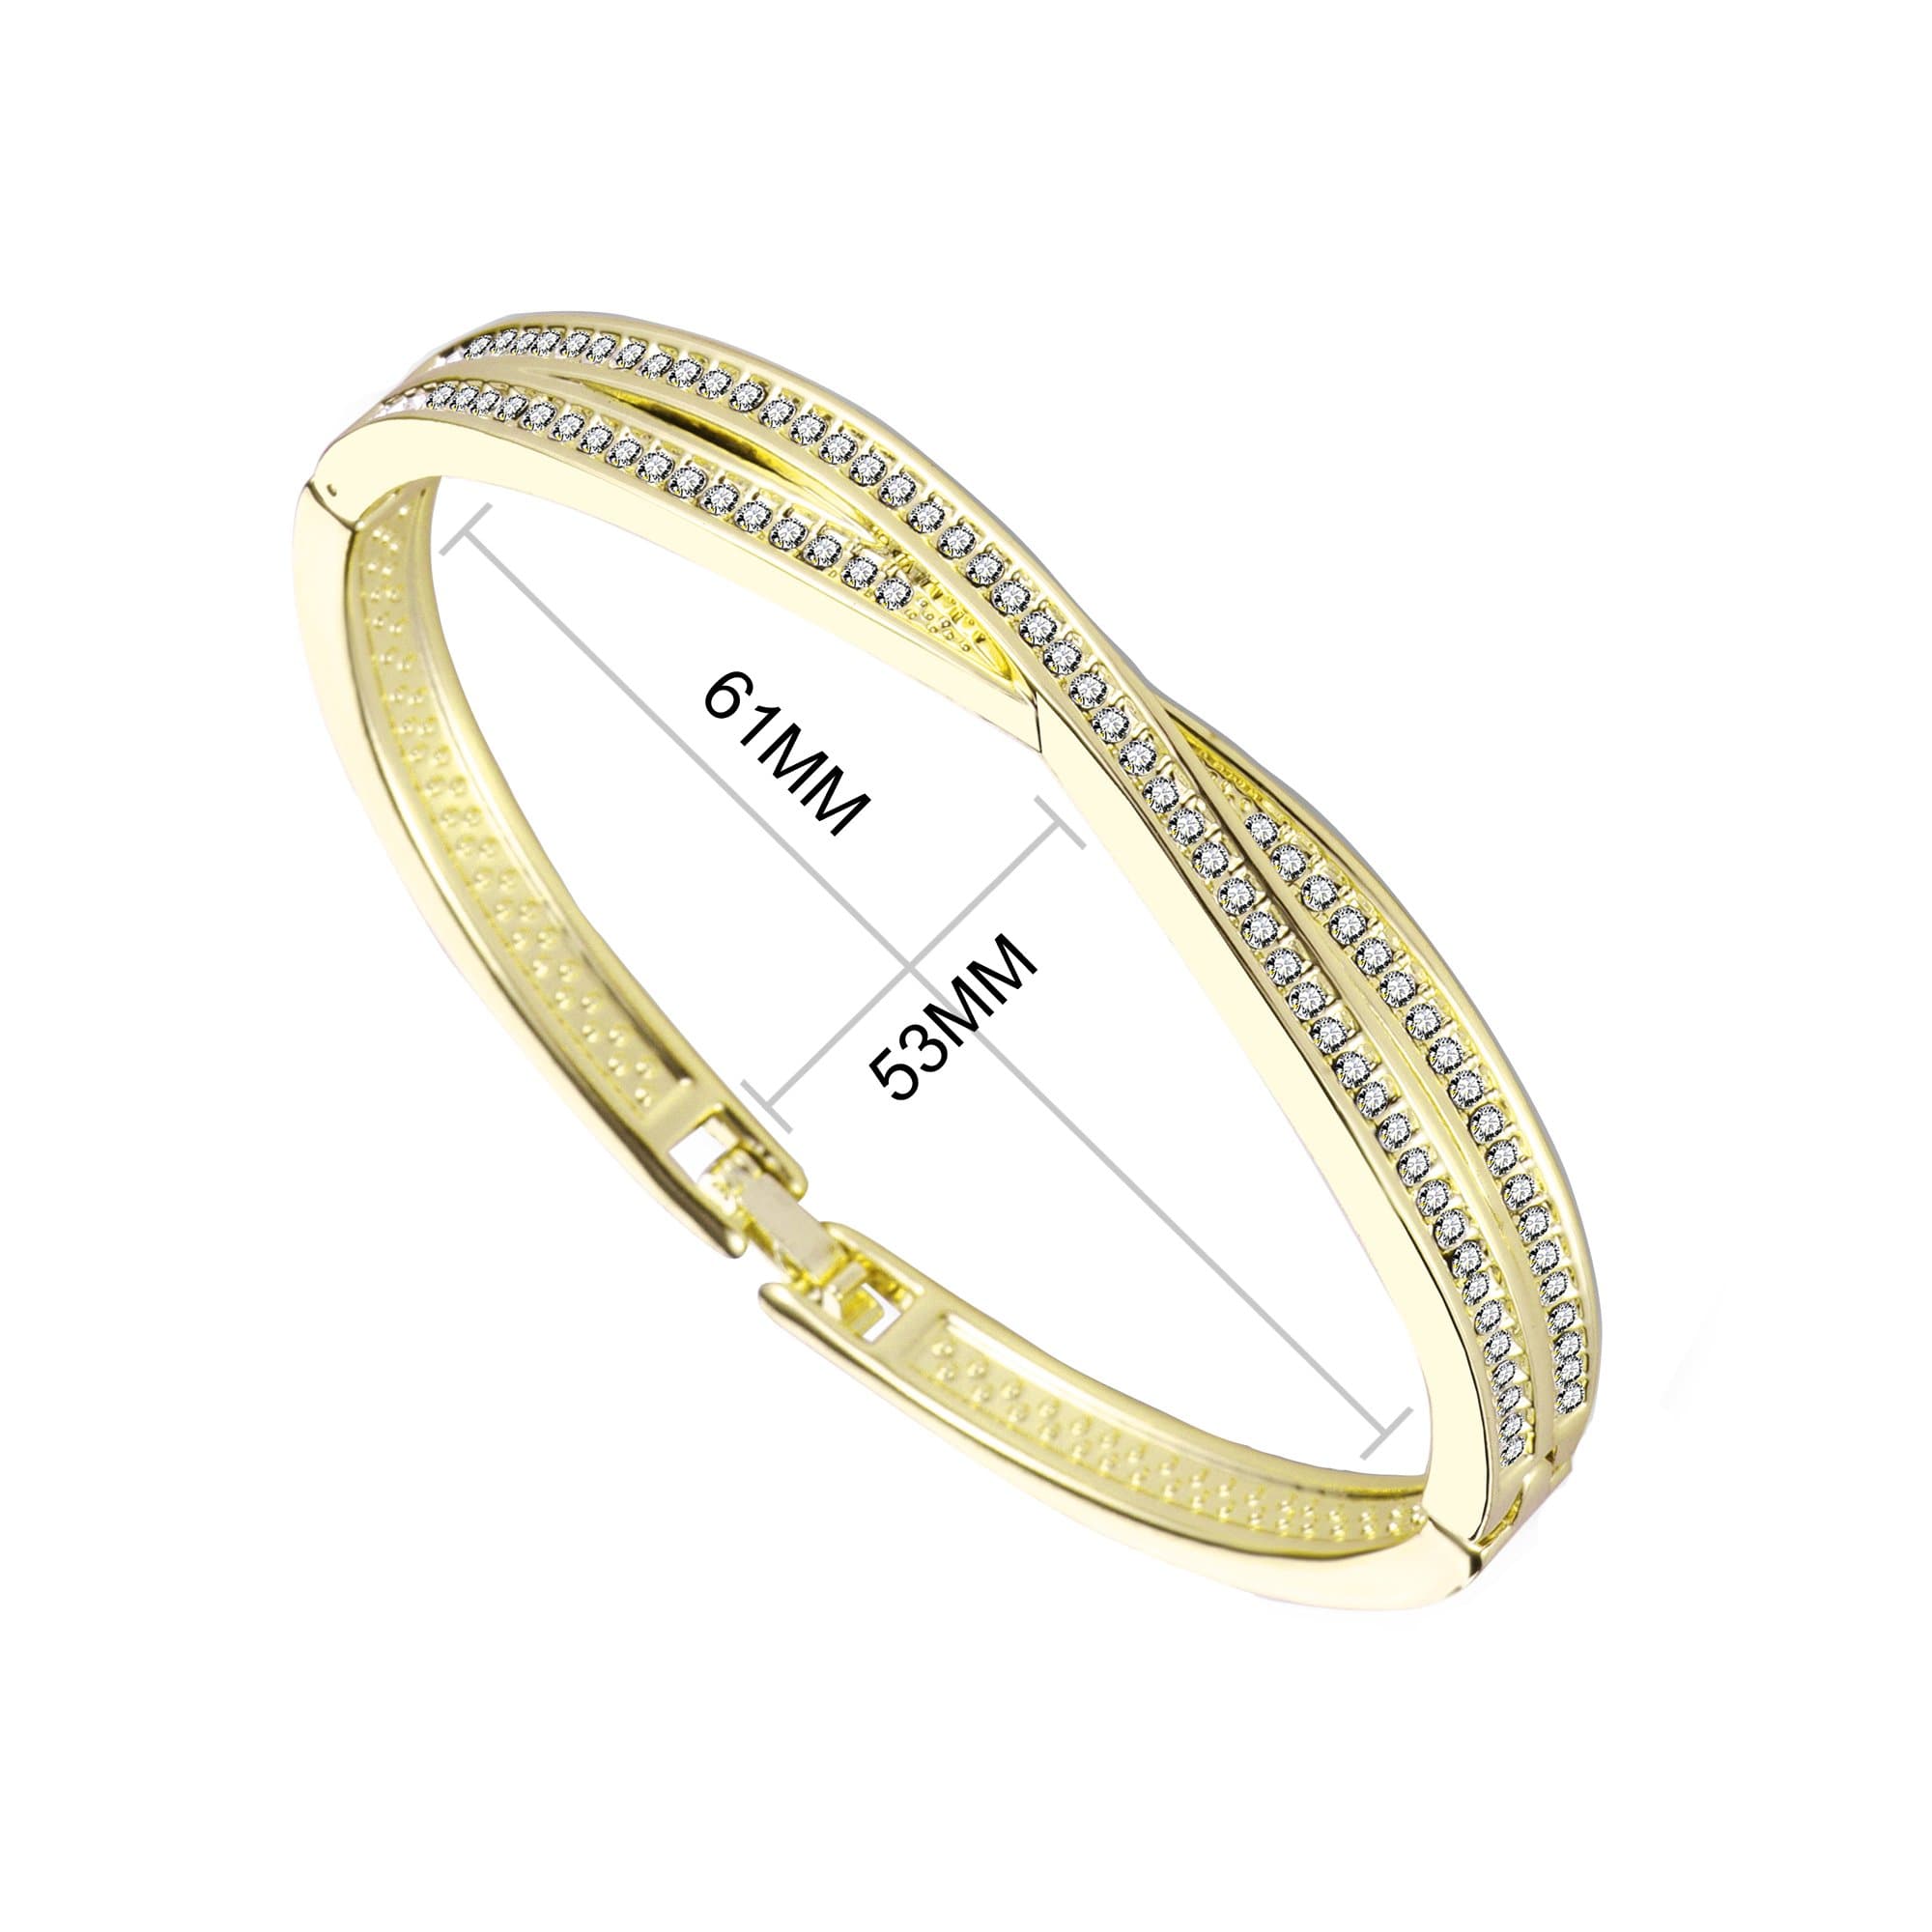 Gold Plated Crossover Bangle Created with Zircondia® Crystals